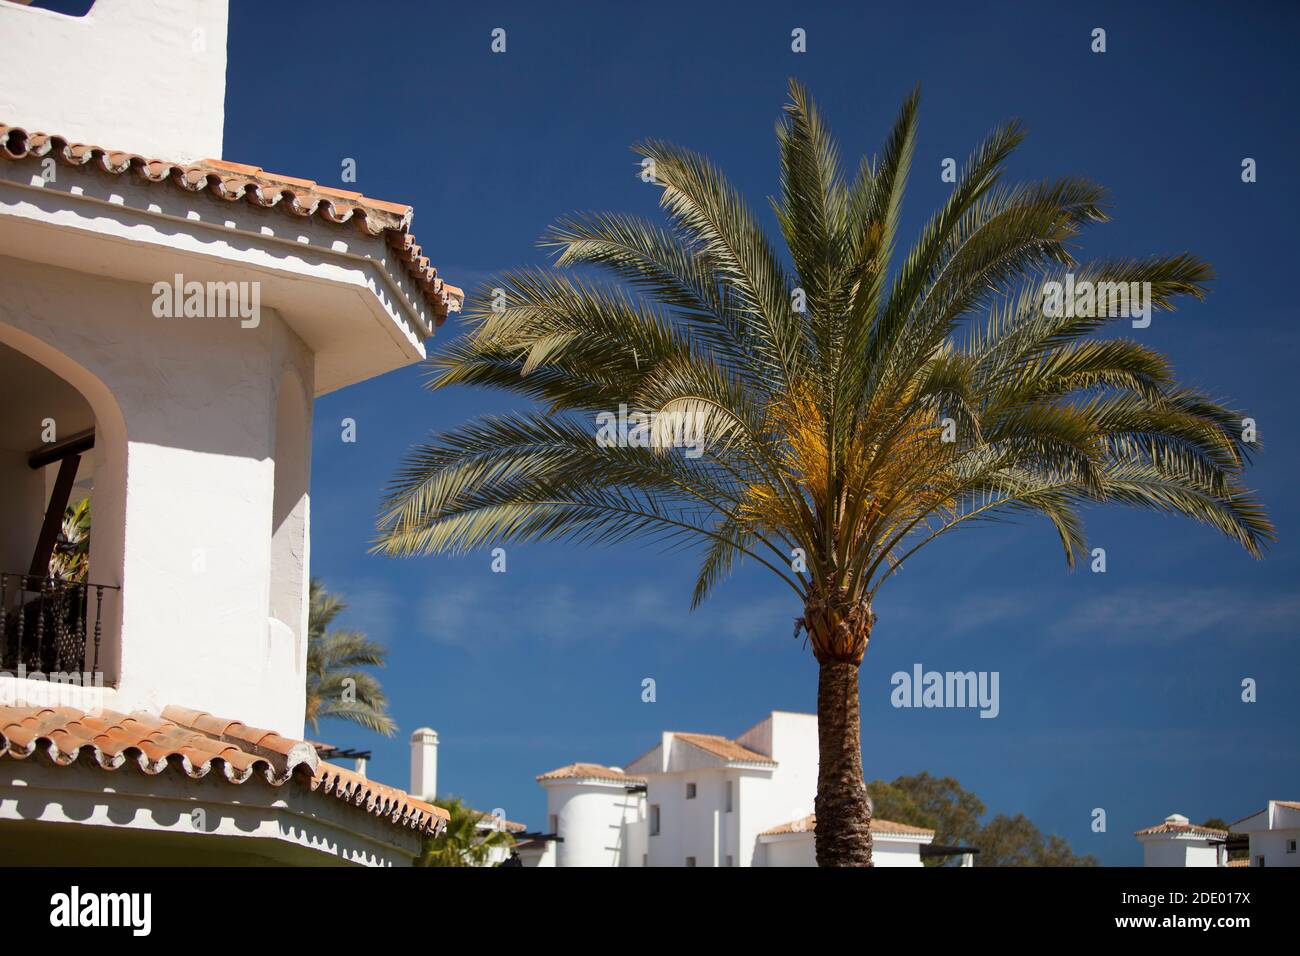 A palm tree in the garden of a luxury villa in spain Stock Photo